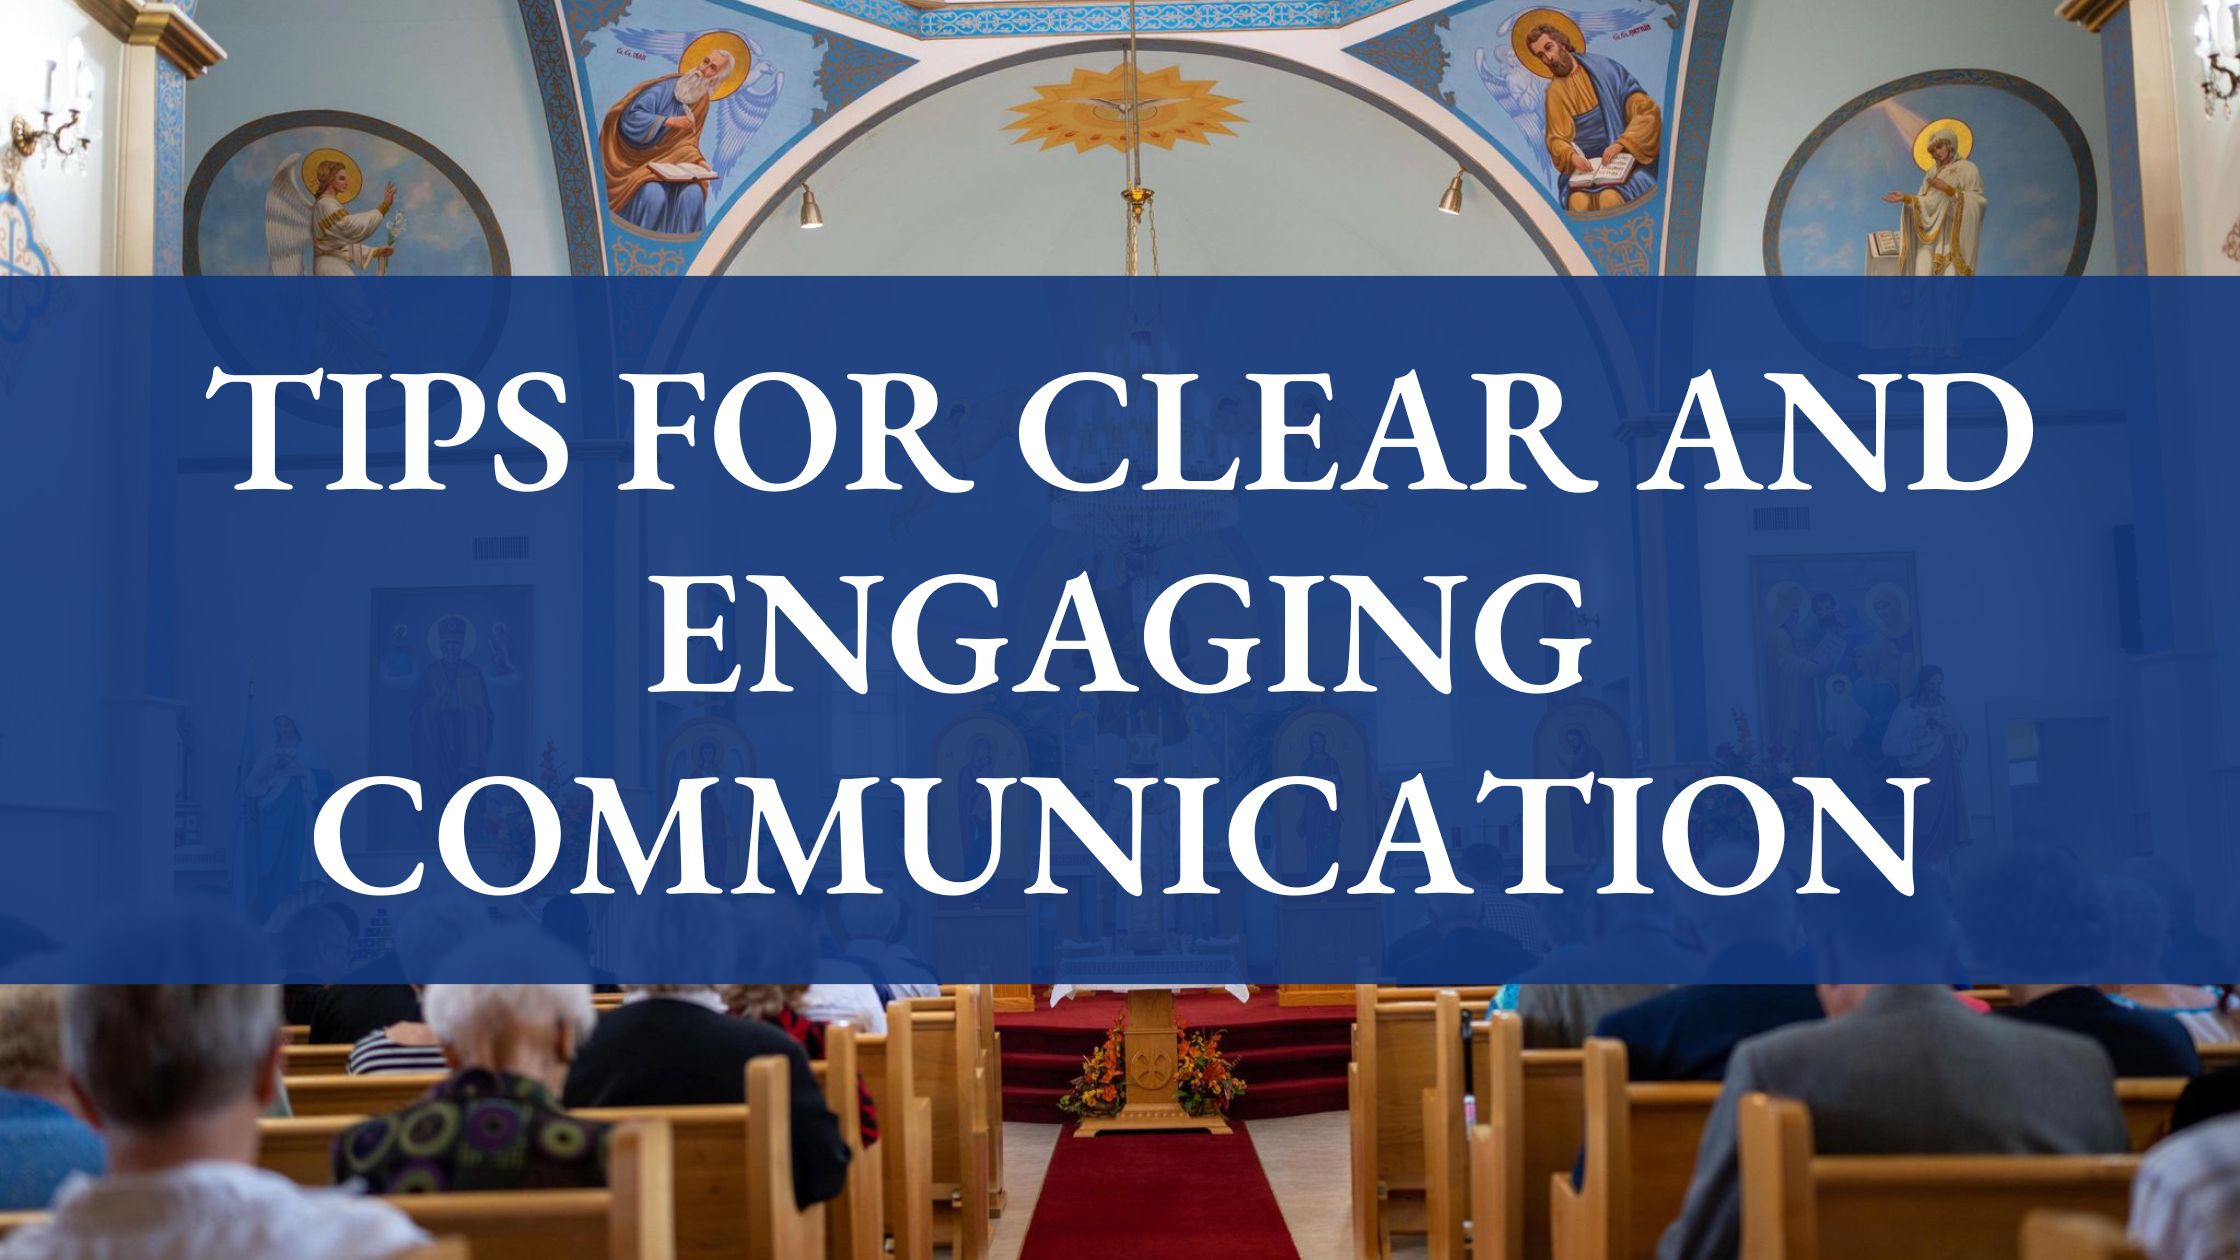 Tips for Clear and Engaging Communication